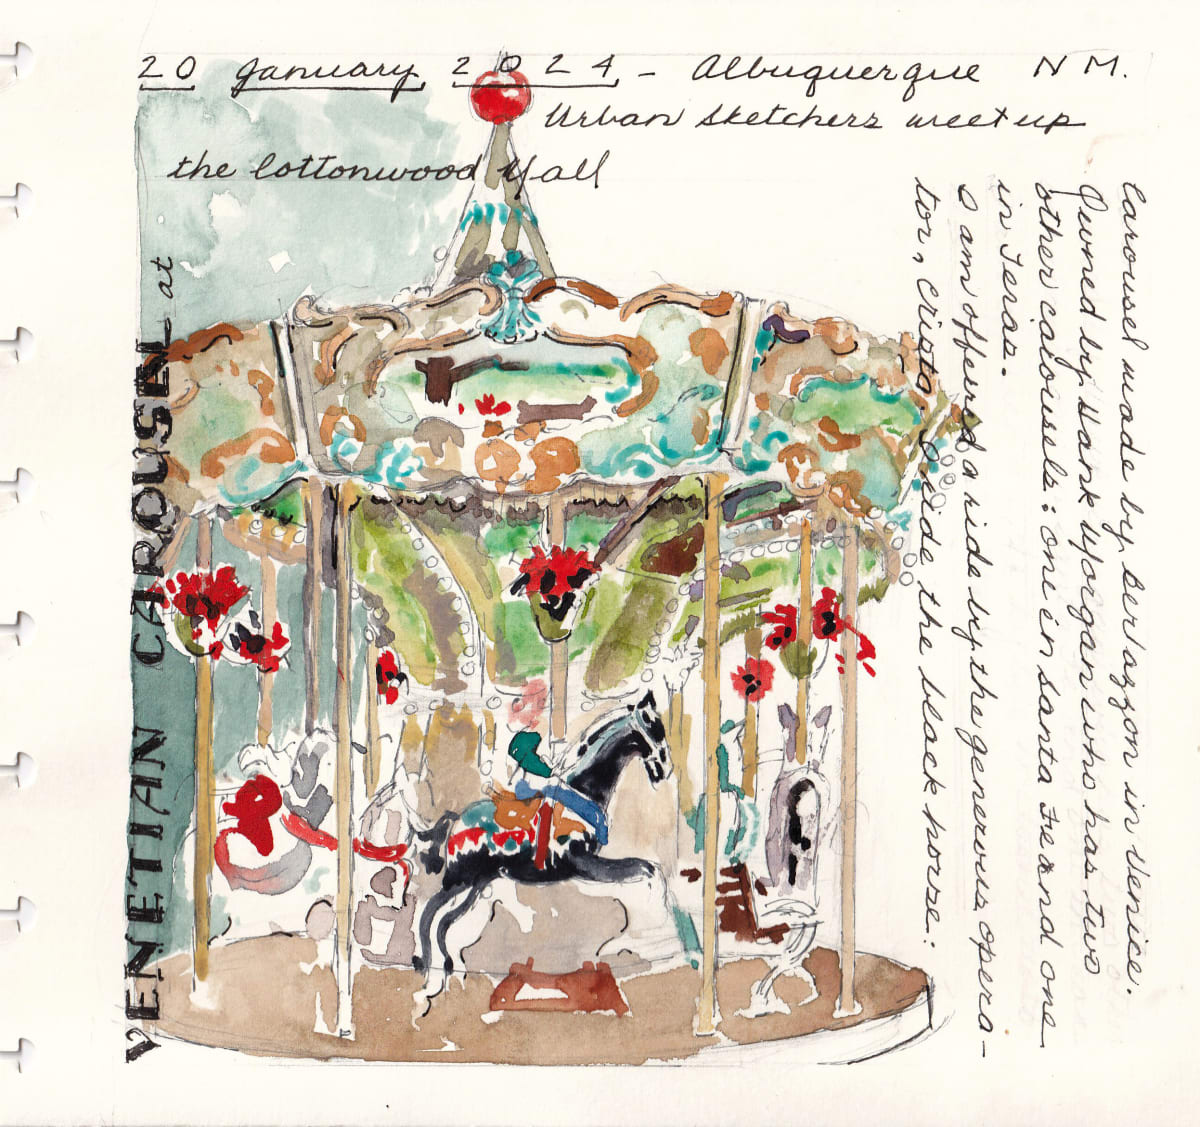 Journey Daybook Page by Margaret Pulis Herrick (Peggy)  Image: Carousel image made at Urban Sketcher event